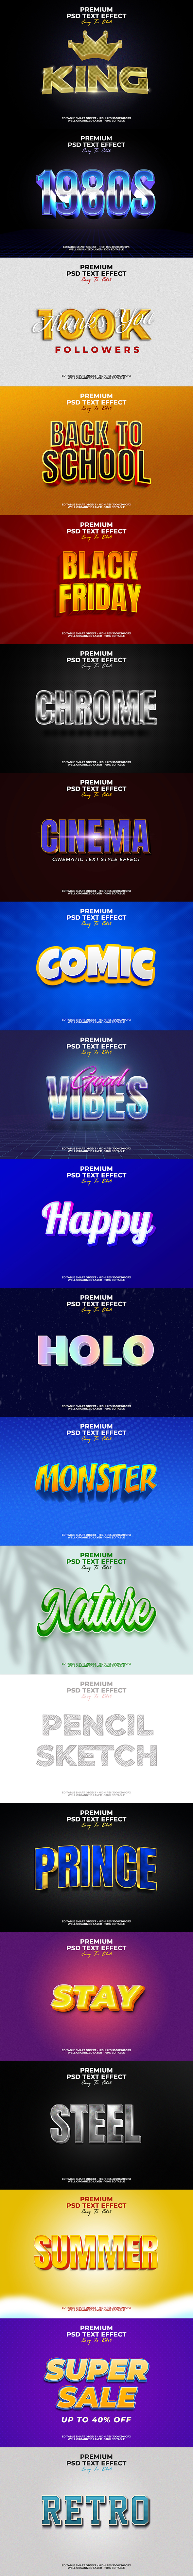 20 Different Styles of Text Effects Vol. 1